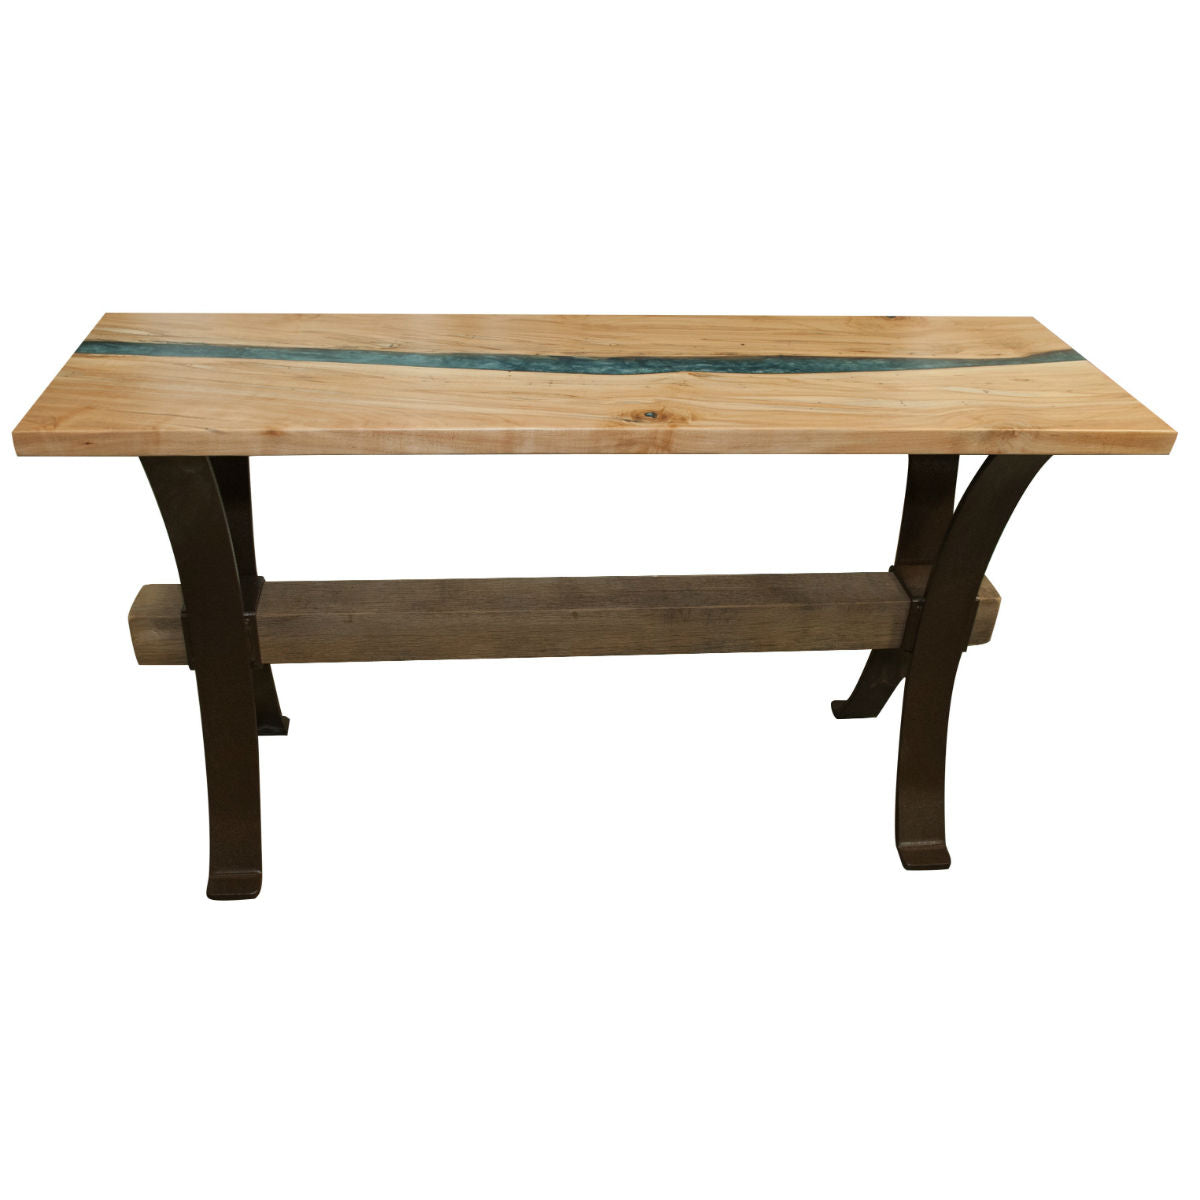 Wormy Maple Sofa Table with Steel Base, Timber Beam